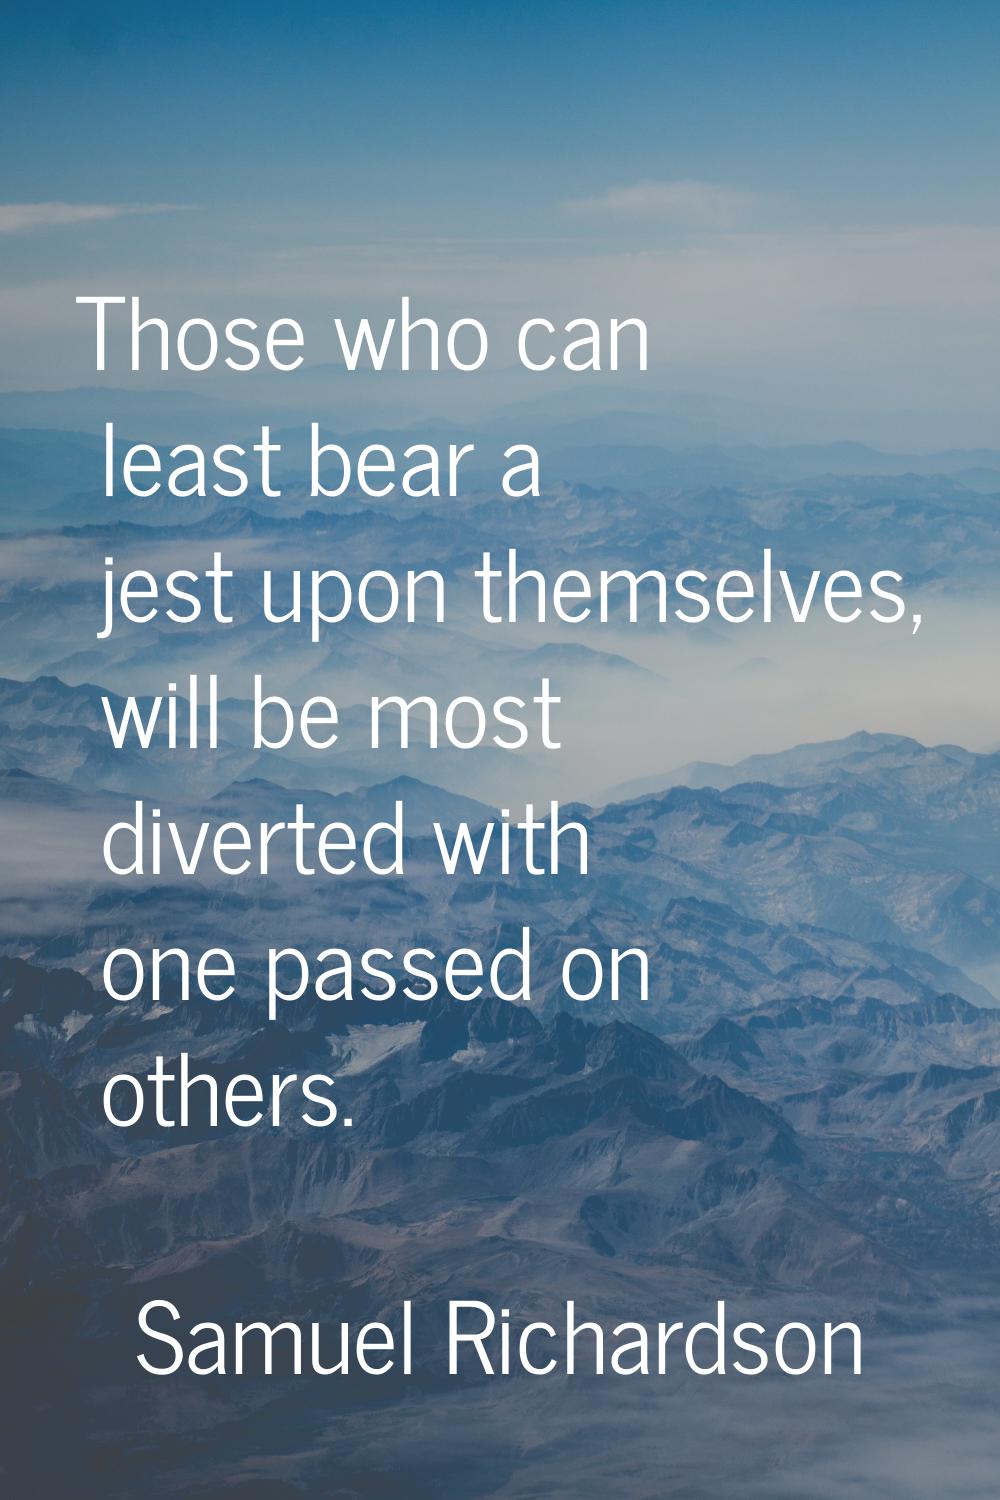 Those who can least bear a jest upon themselves, will be most diverted with one passed on others.